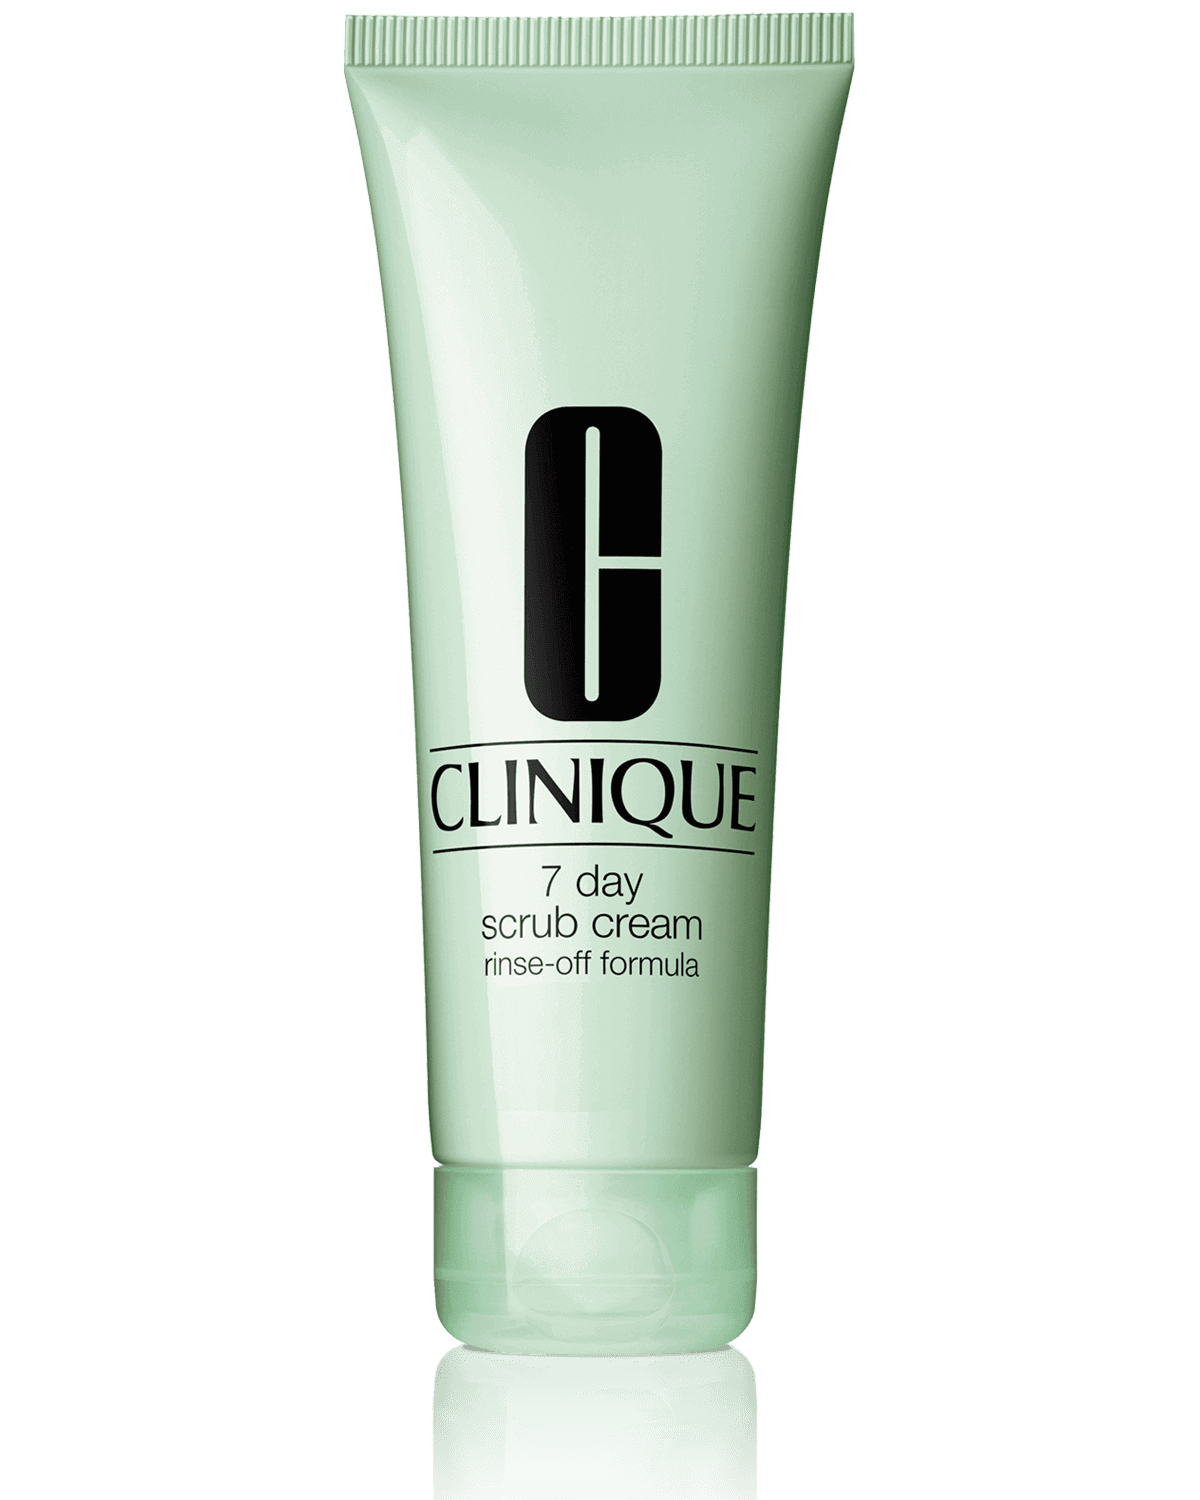 Крем-скраб Clinique 7 Day Rinse-Off Formula, 100 мл крем скраб clinique 7 day rinse off formula 100 мл